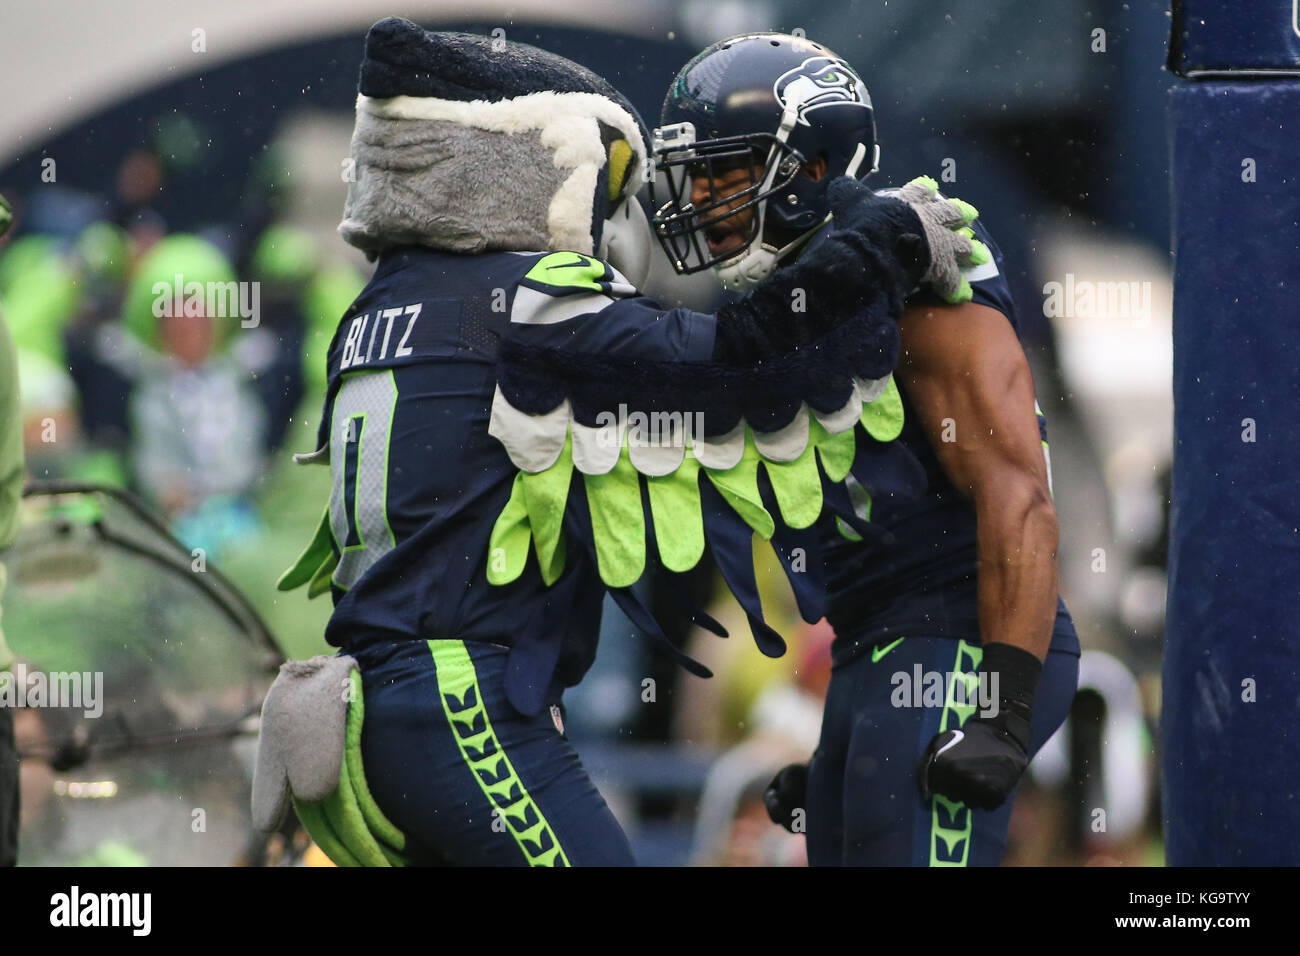 Washington, USA. 5th Nov, 2017. Seattle Seahawks linebacker Bobby Wagner (54) and Blitz, the Seahawks mascot, celebrate after forcing a safety during a game between the Washington Redskins and the Seattle Seahawks at CenturyLink Field in Seattle, WA on November 5, 2017. Credit: Cal Sport Media/Alamy Live News Stock Photo